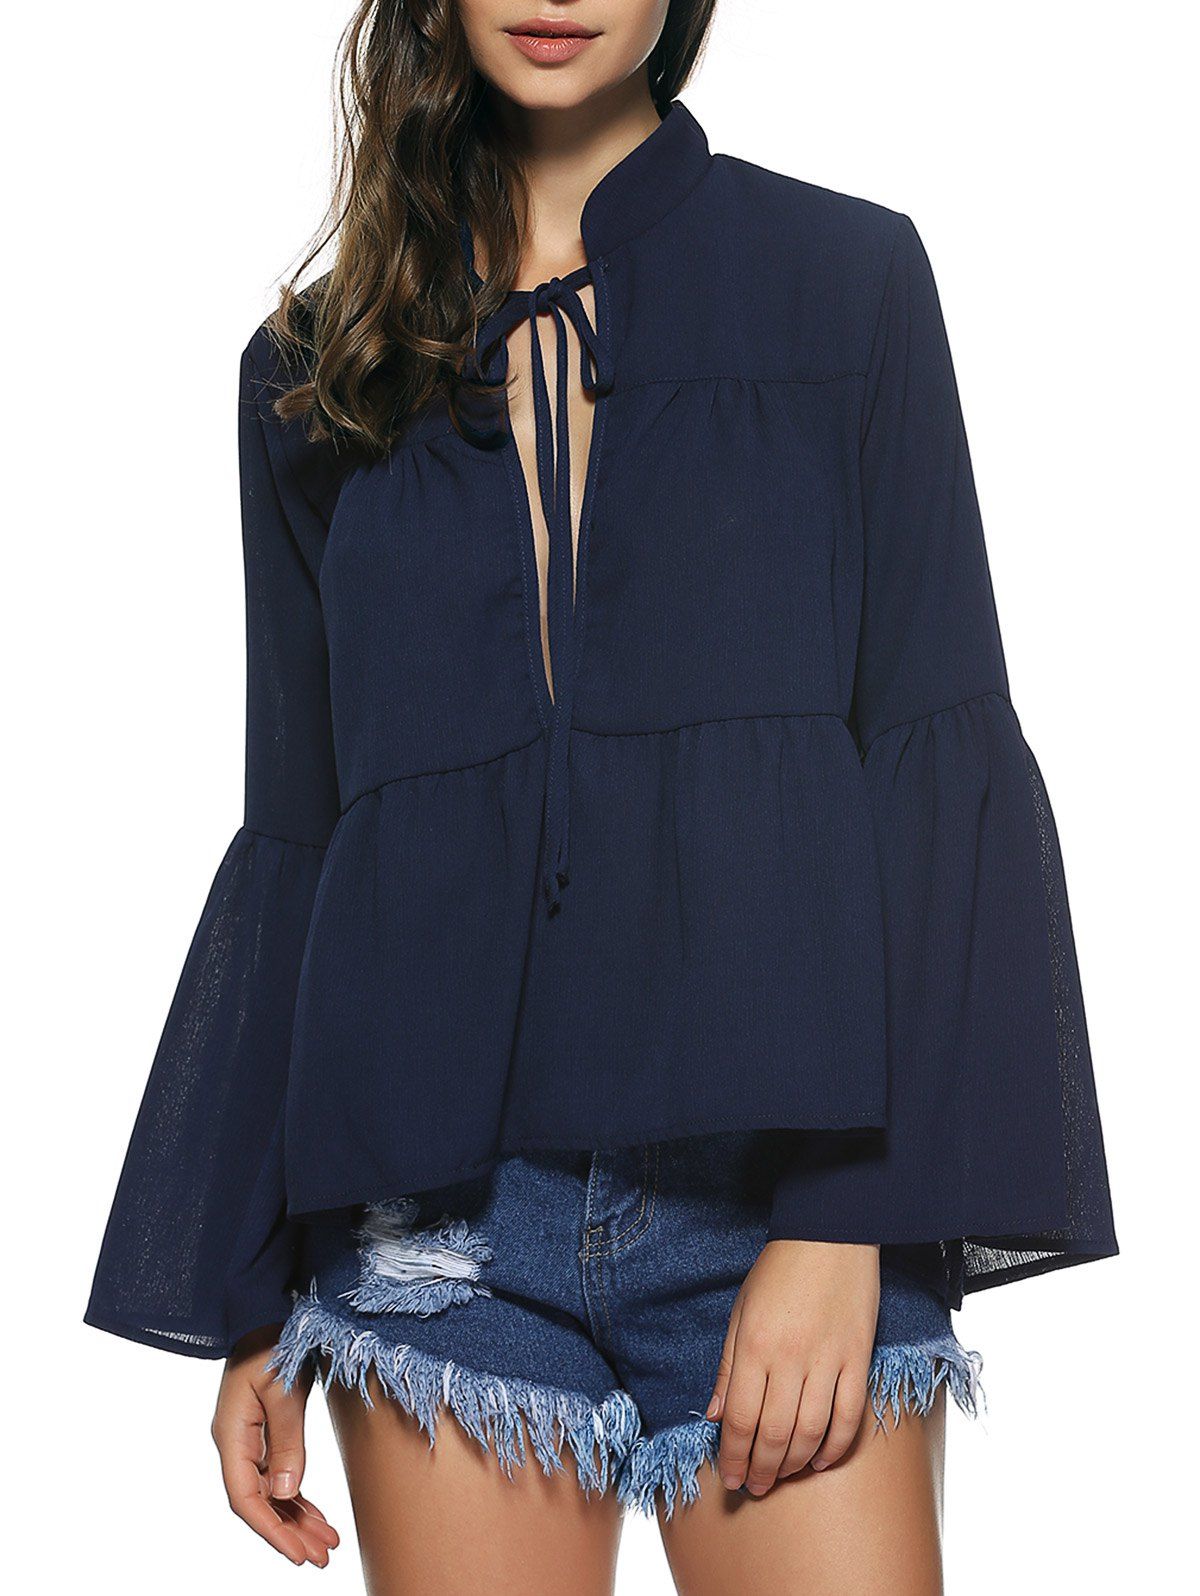 Bell Sleeves Lace Up Flounce Blouse - DEEP BLUE L